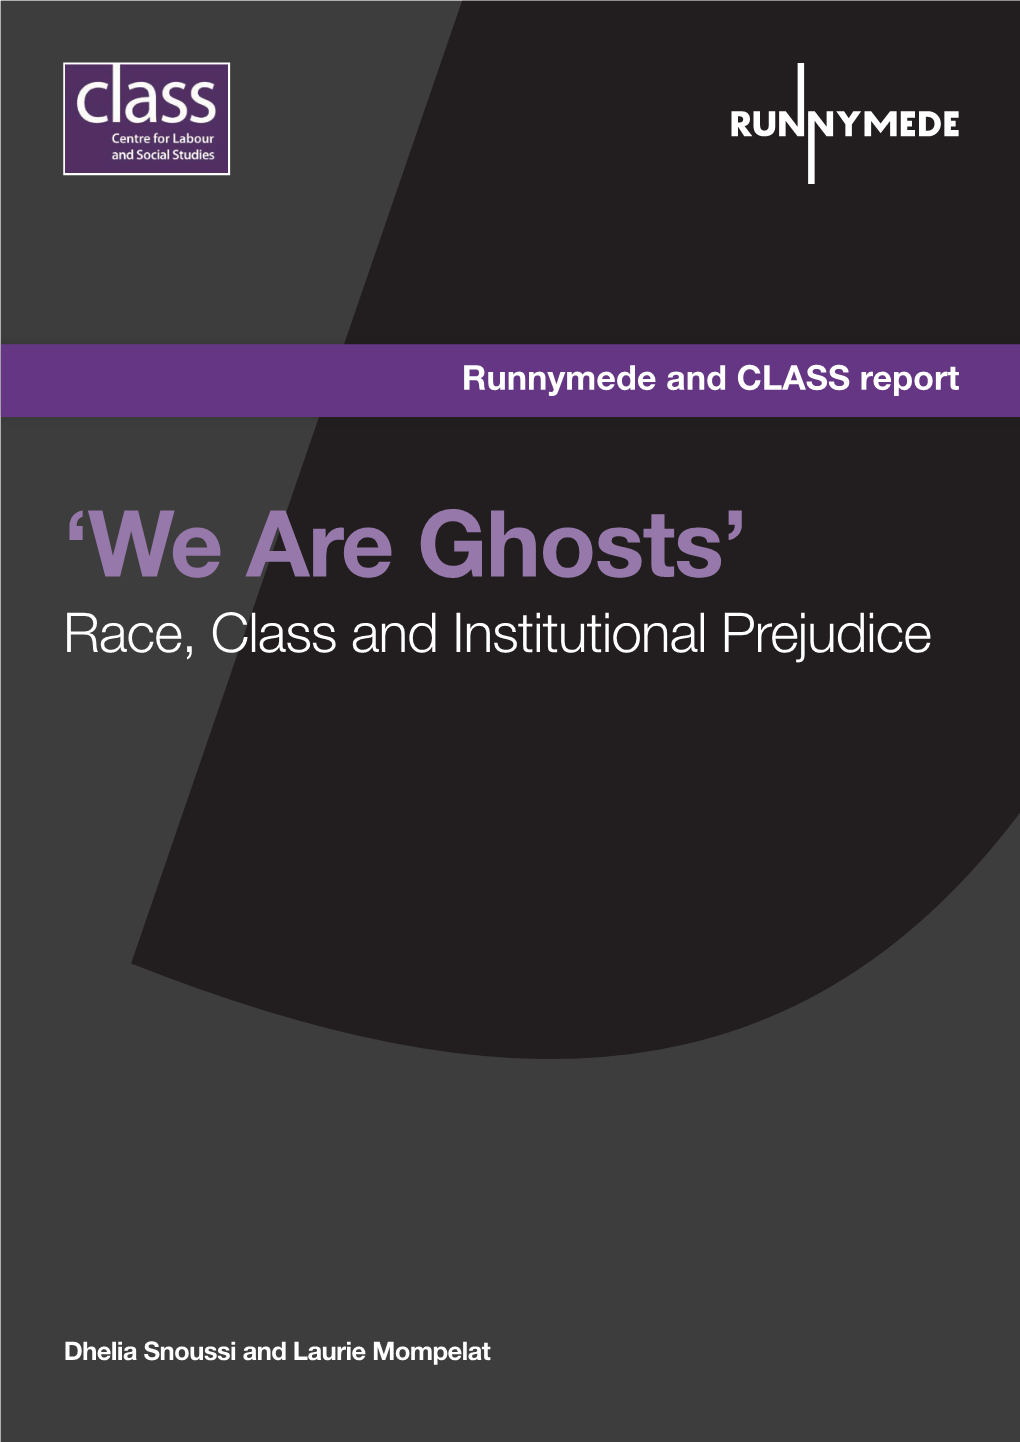 We Are Ghosts’ Race, Class and Institutional Prejudice